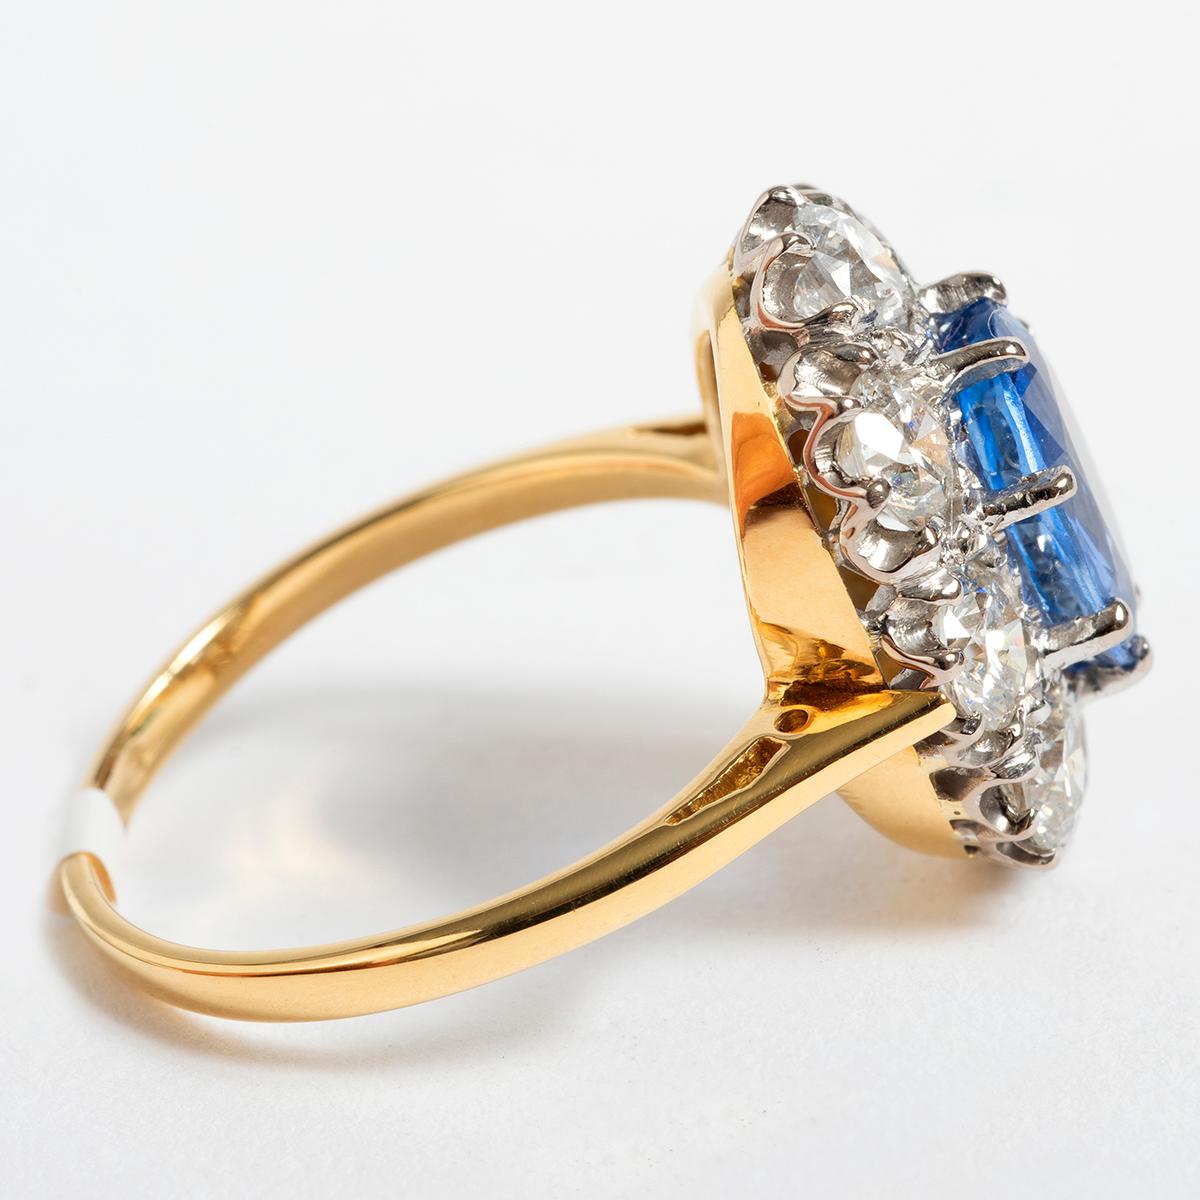 This exquisite and generous sapphire and diamond cluster ring is set in 18K Yellow Gold. The sapphire weighs est 1.58ct in diamonds est 1.75ct, clarity and colour h/si. This ring comes in UK size N and US size 6.75.  